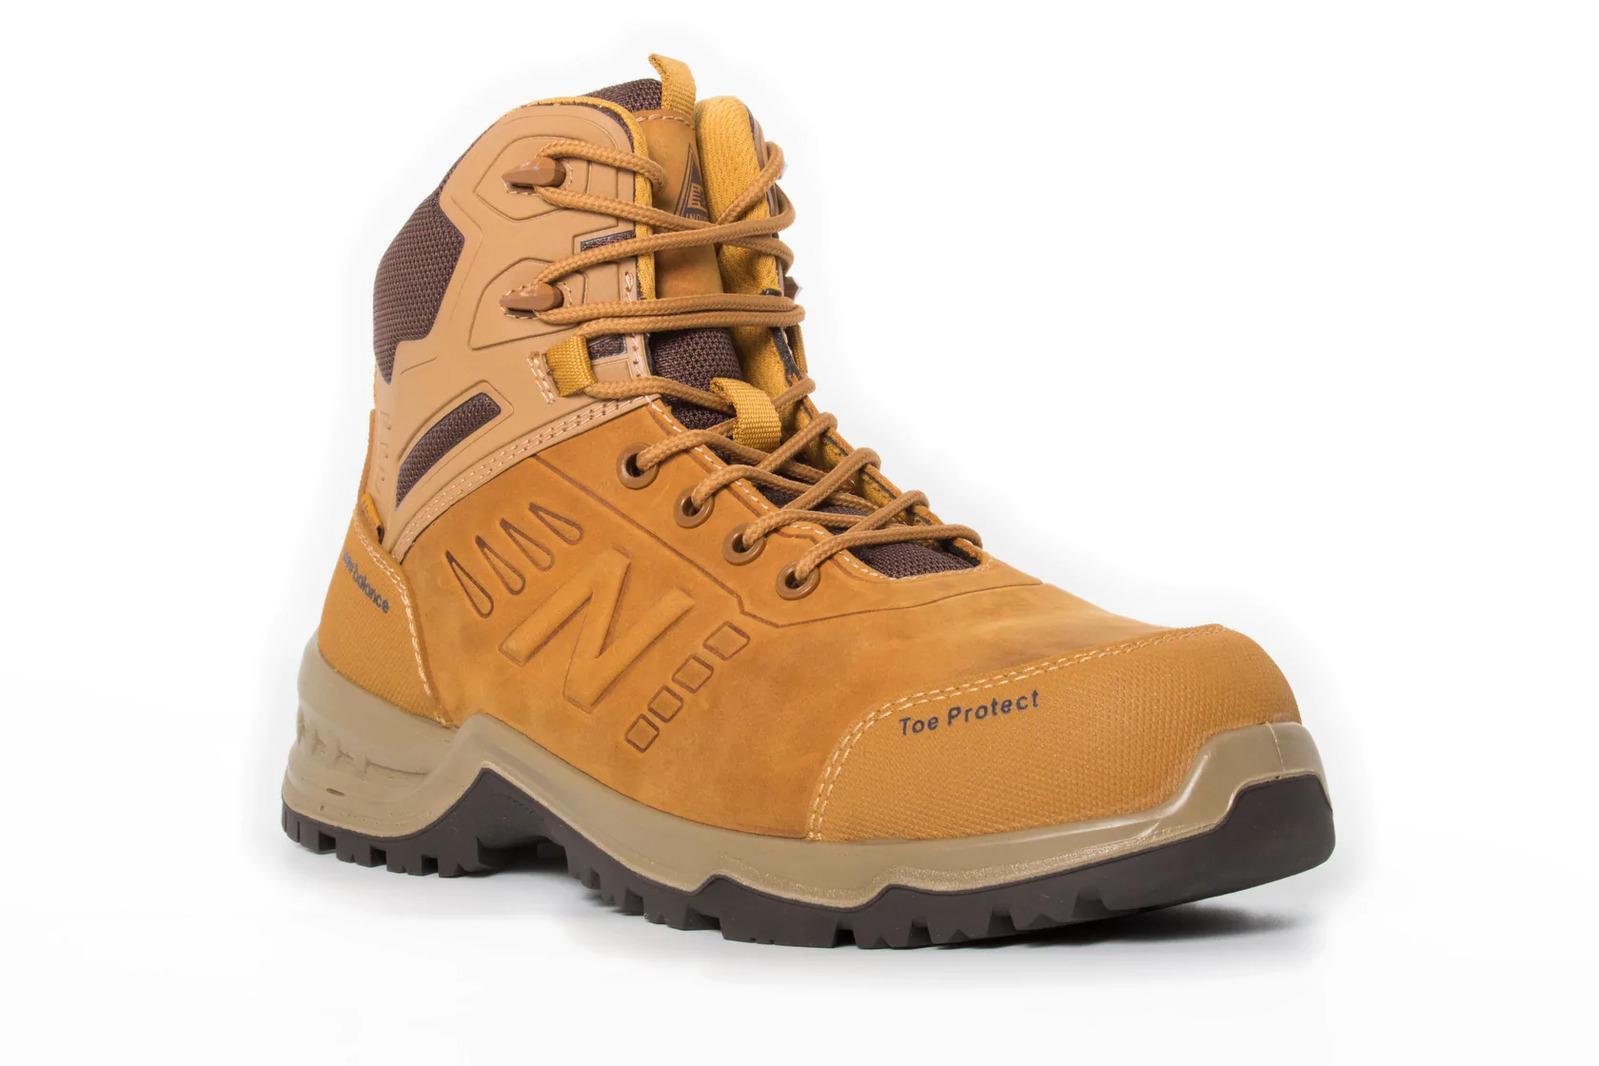 New Balance Mens Contour Steel Toe Cap Safety Work Boots with Zip - Wheat - US 10.5 Width:4E